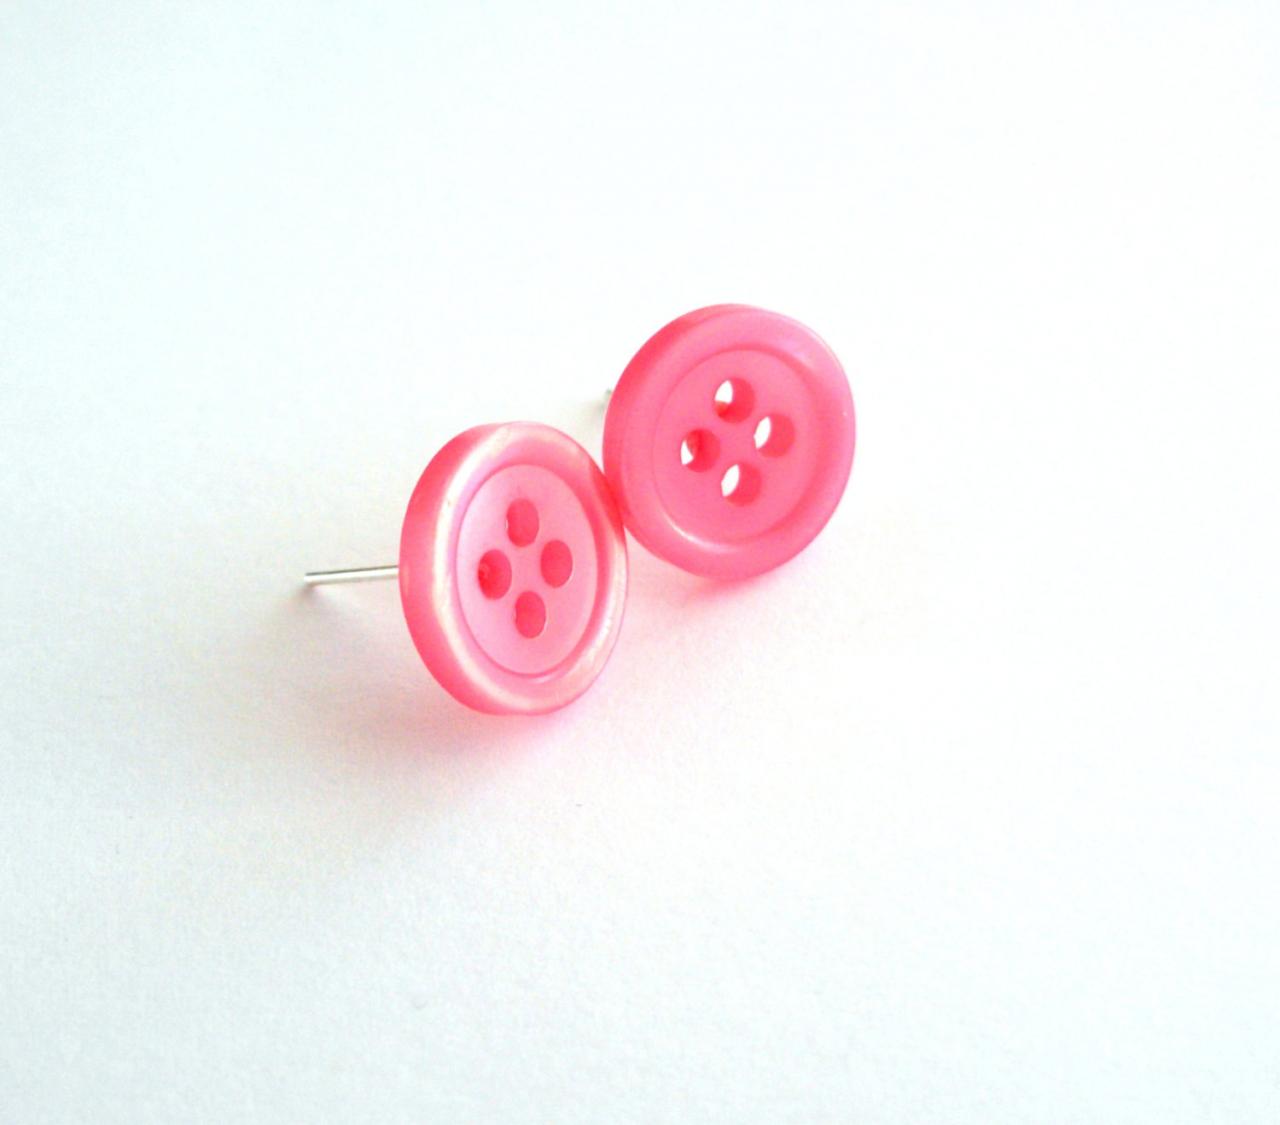 Neon Pink Post Earrings Handmade Of Vintage Buttons - Funny, Eyecatching, Ecofriendly - Upcycled Jewelry, Buttons Earrings